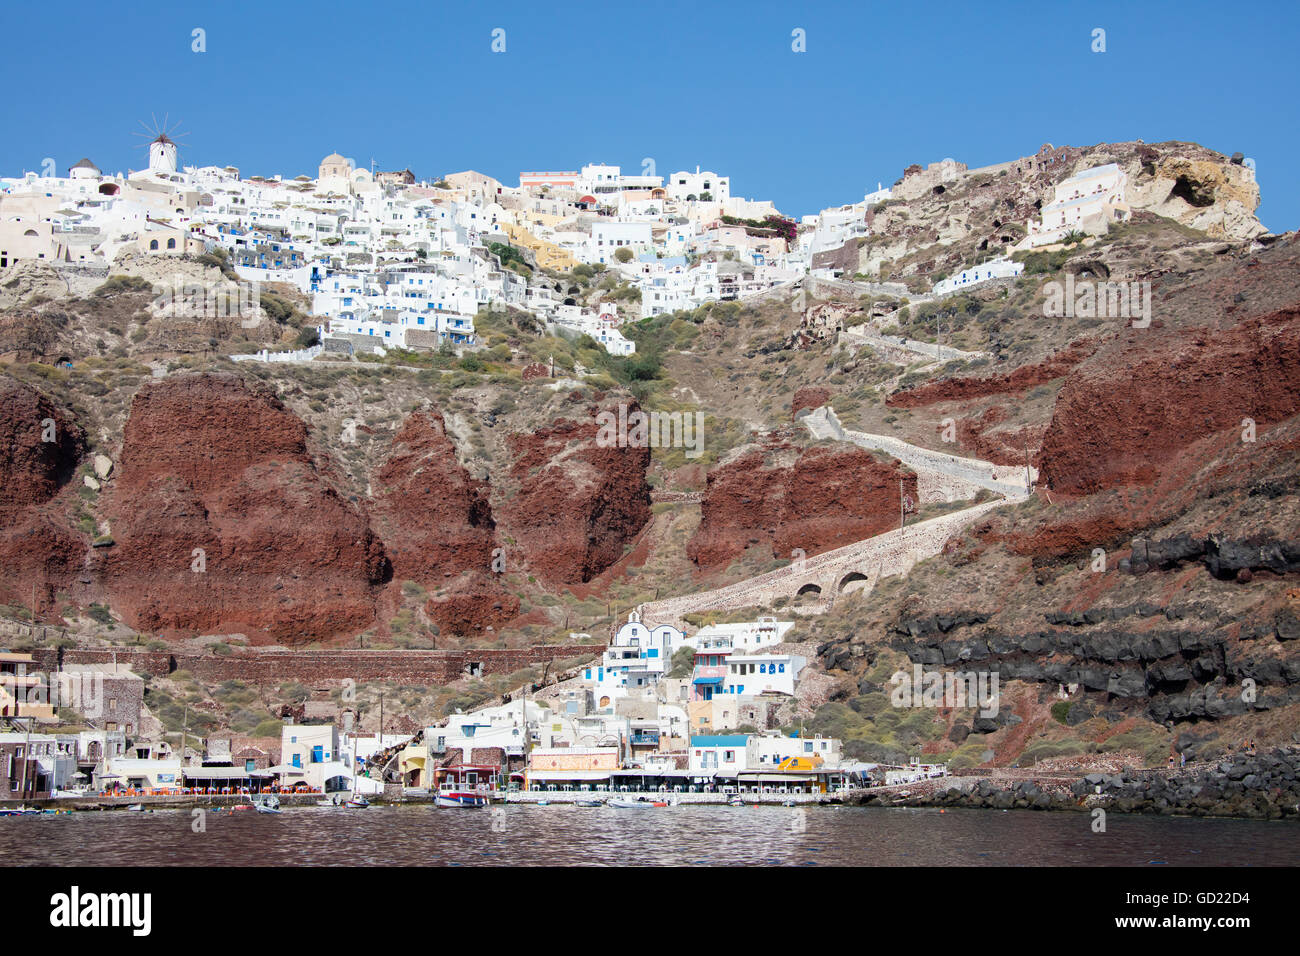 Typical Greek village perched on volcanic rock with white and blue houses and windmills, Santorini, Cyclades, Greece Stock Photo